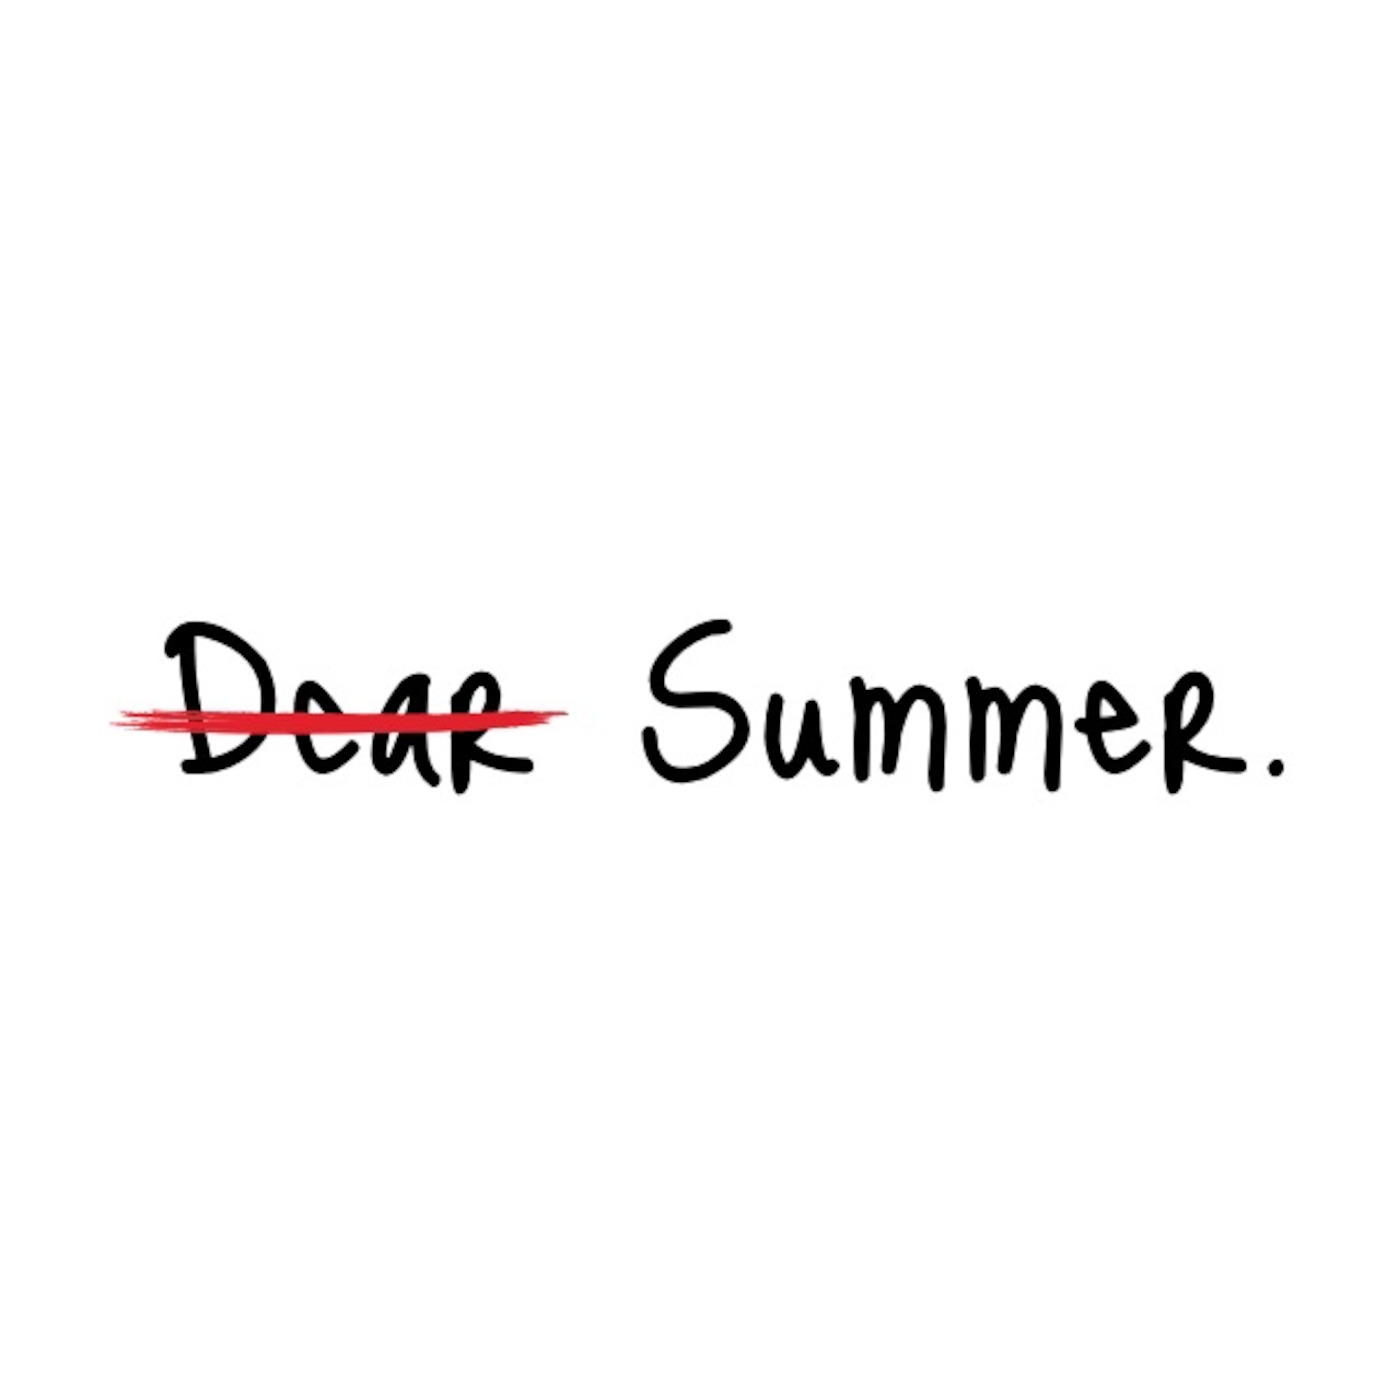 Introduction to "Dear Summer"